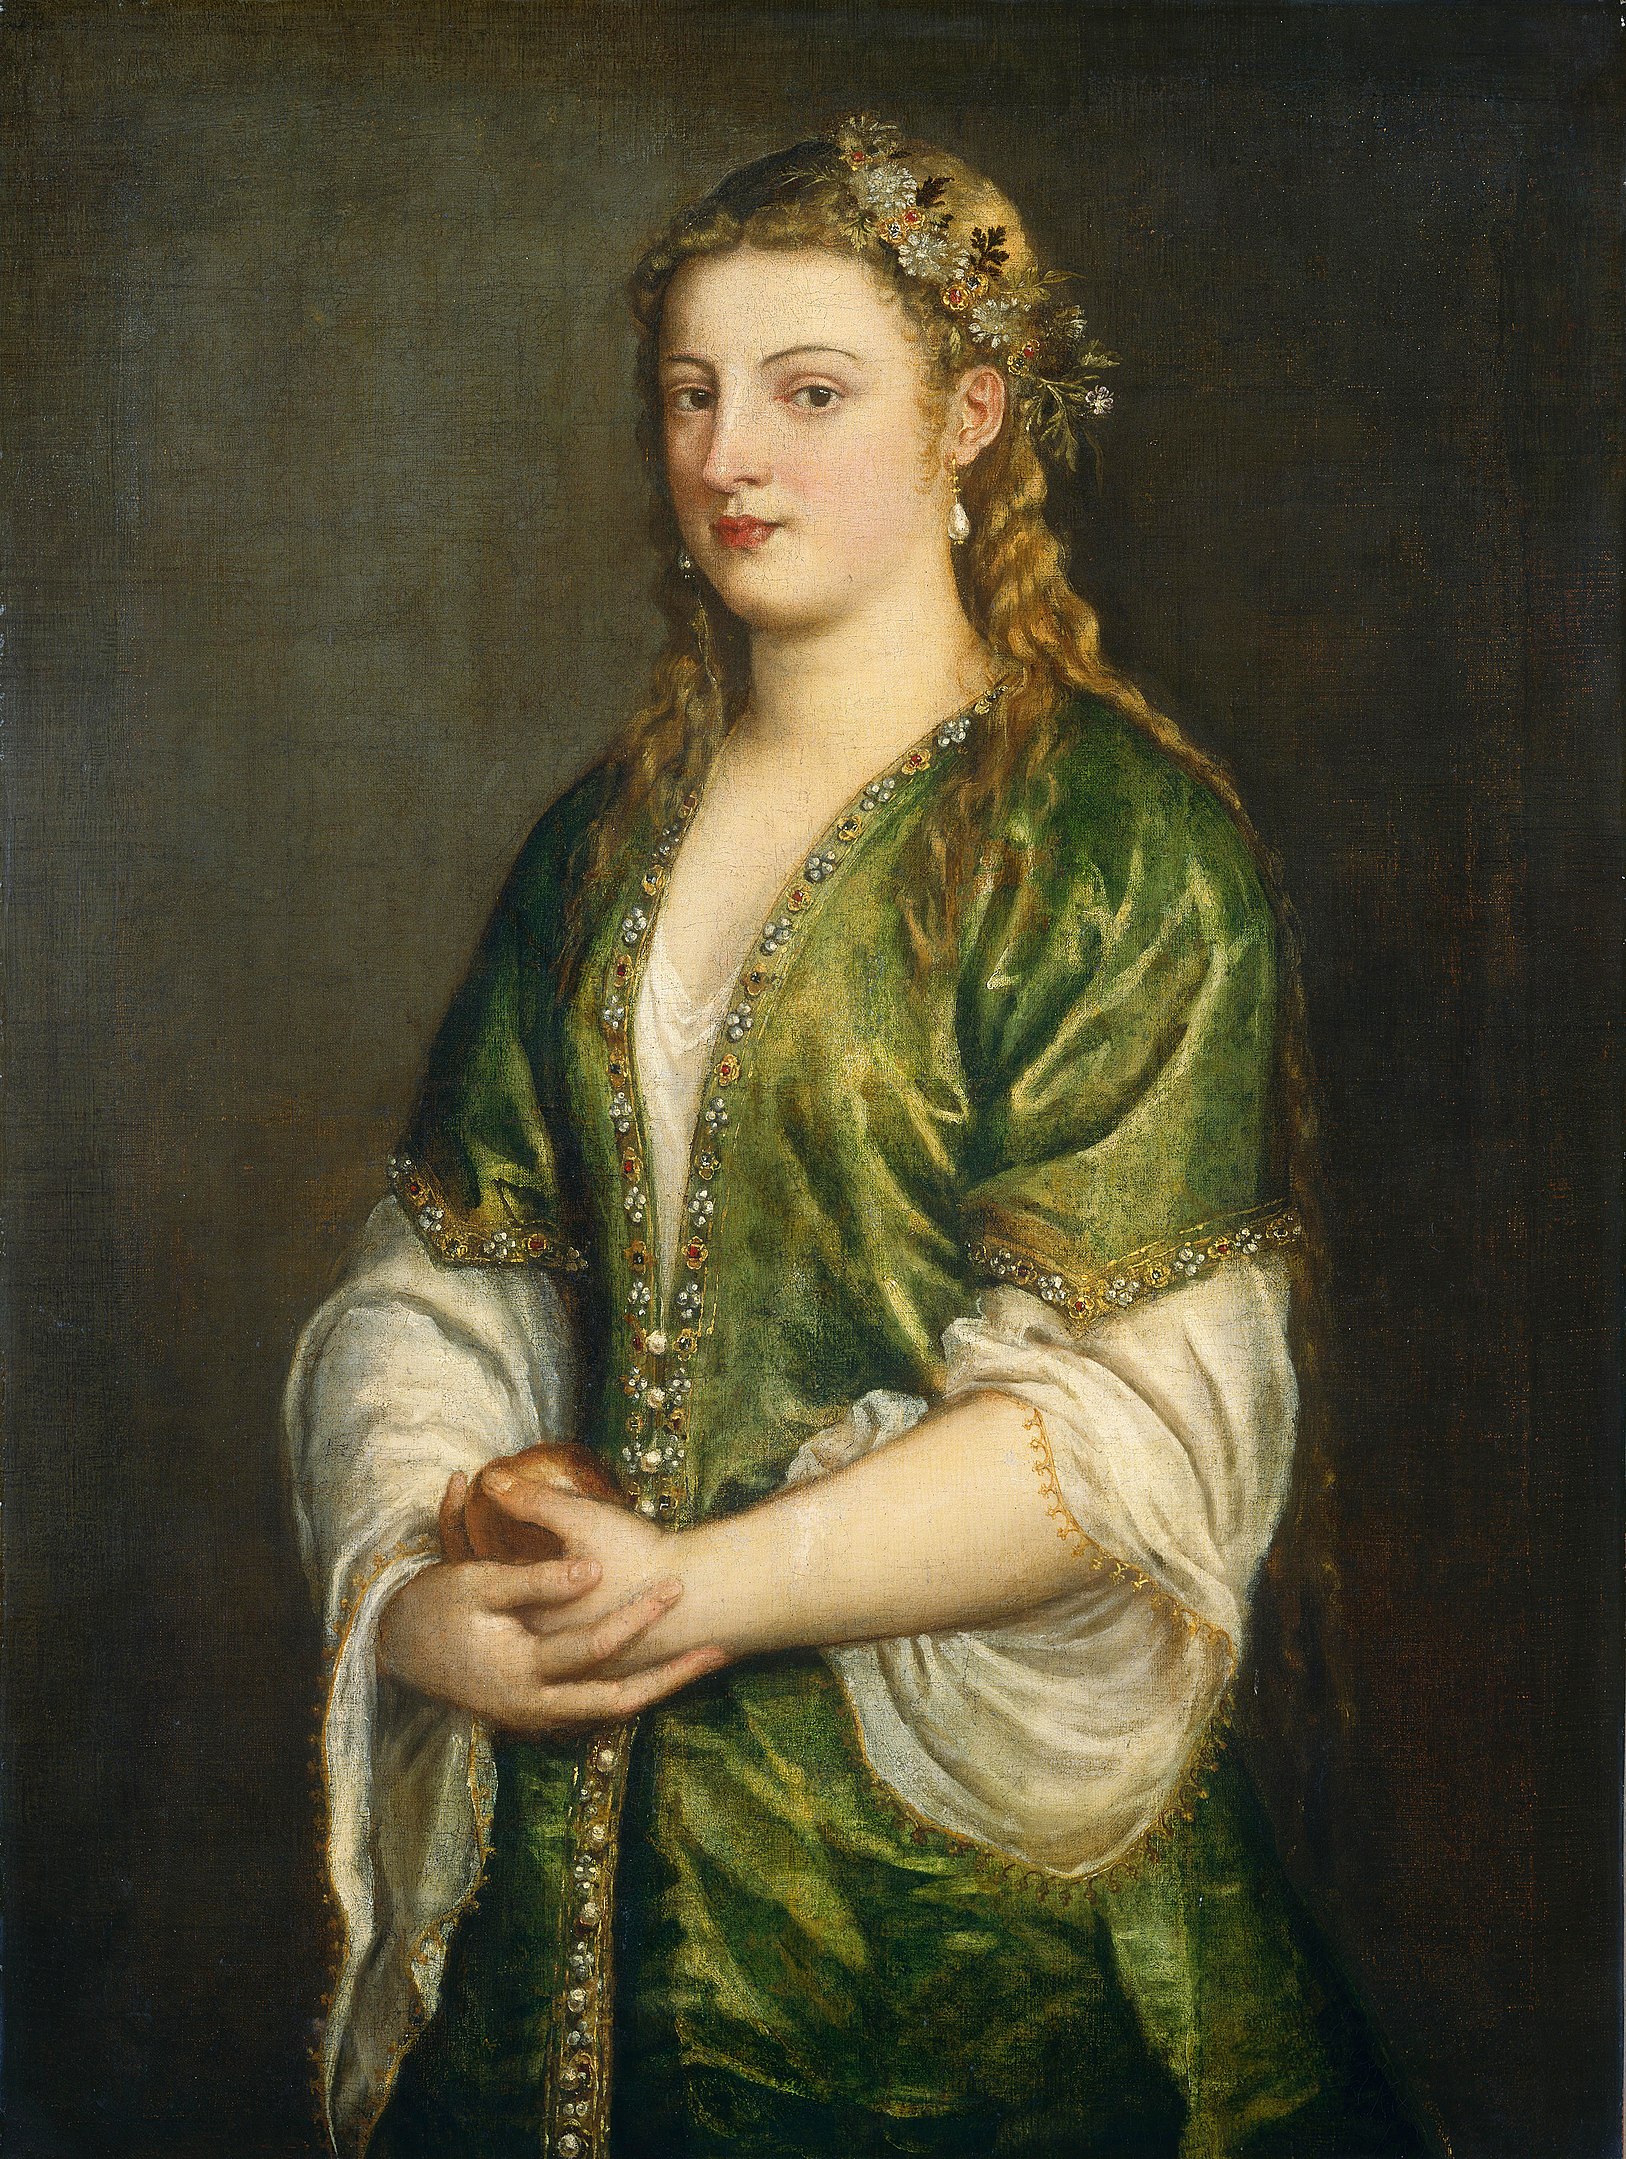 A half-body portrait of a woman holding an apple in her hands